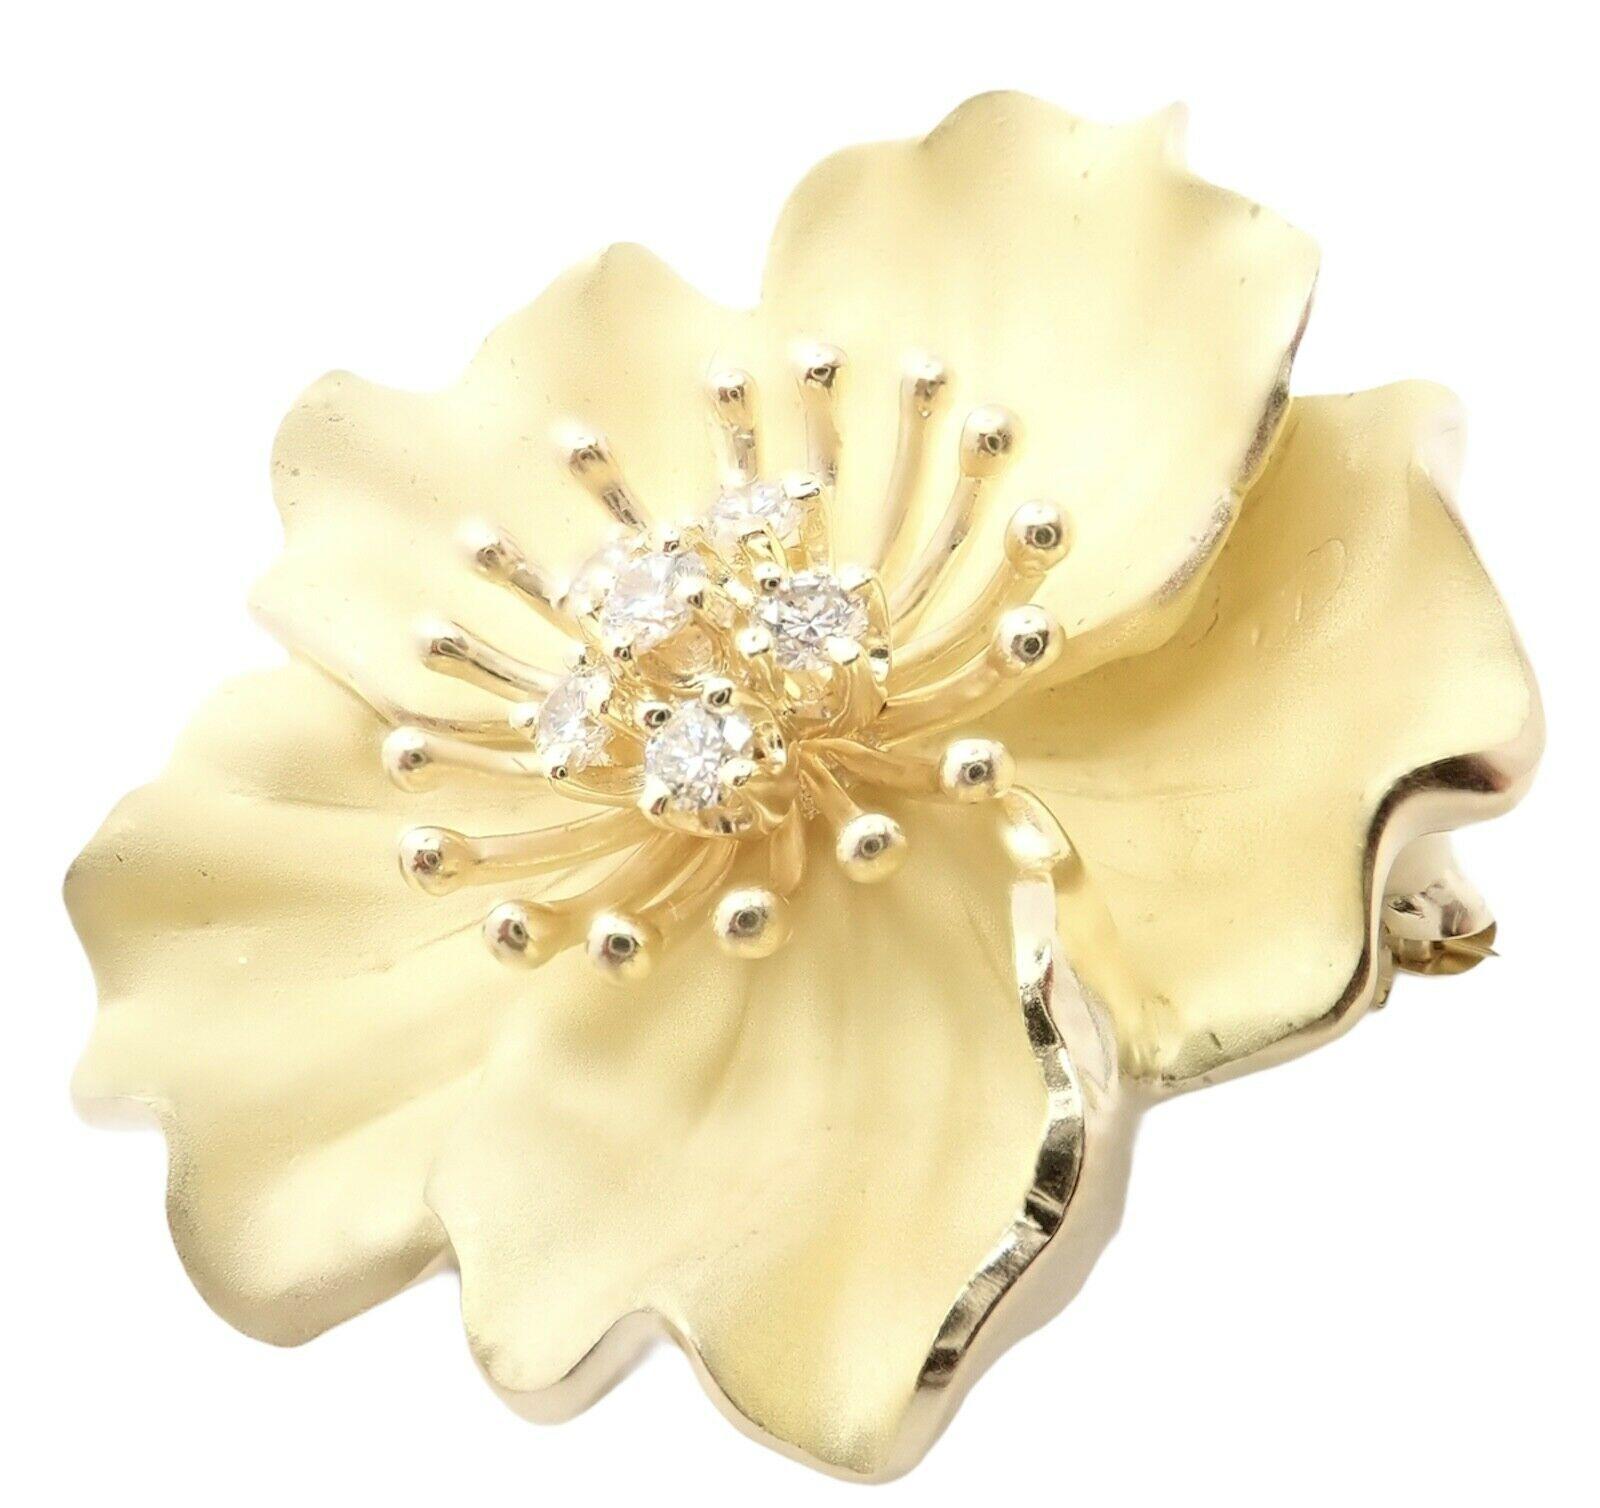 18k Yellow Gold Diamond Dogwood Pin Brooch by Tiffany & Co. 
With 6 round brilliant cut diamonds VS1 clarity, G color total weight approximately .50ct
Details: 
Measurements: 35mm x 35mm
Weight: 29 grams
Stamped Hallmarks: Tiffany & Co 750
**Free